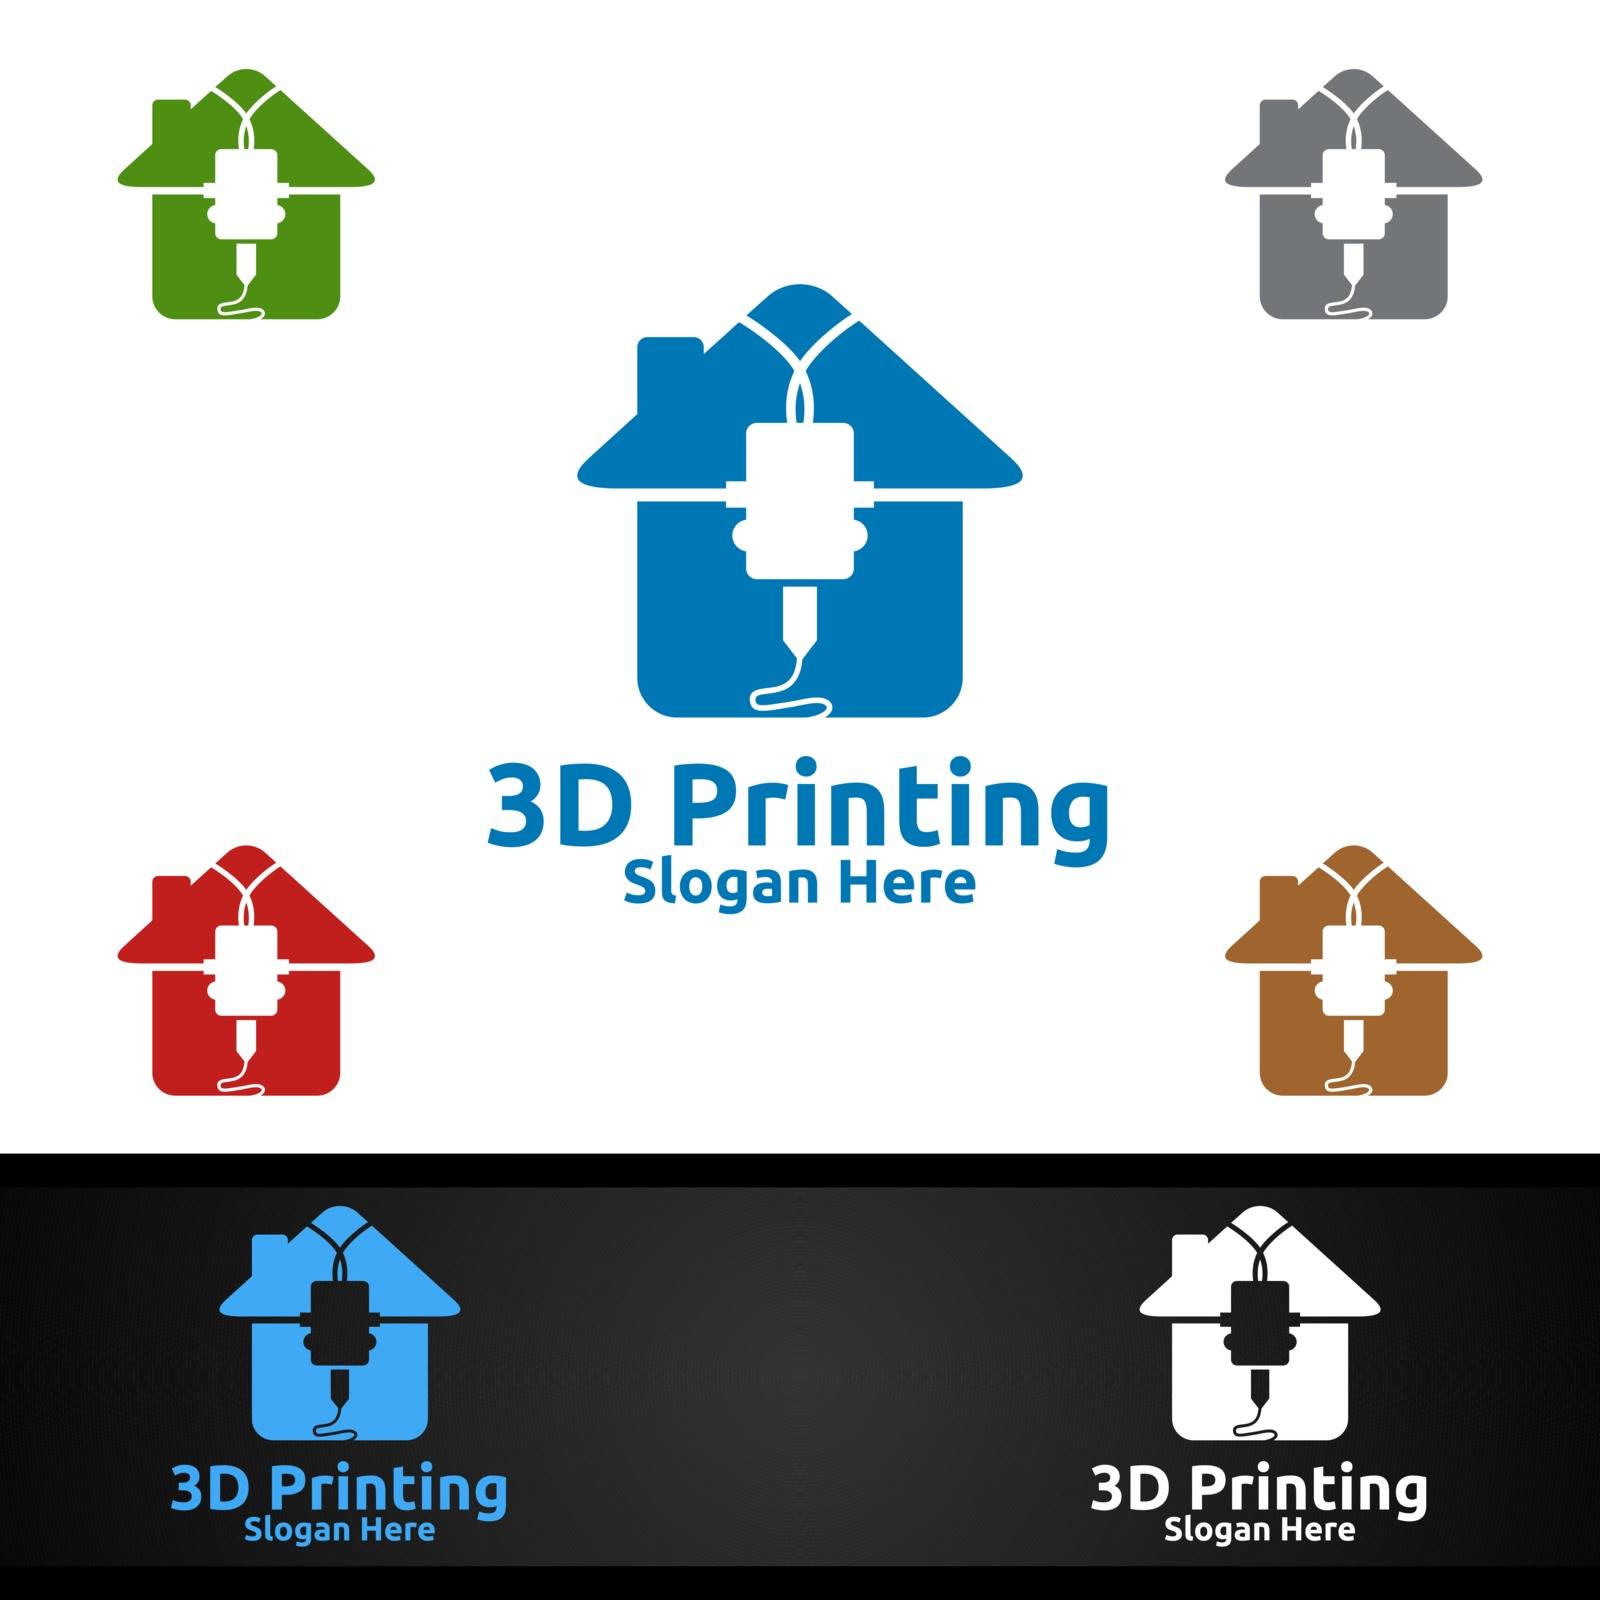 Home 3D Printing Company Vector Logo Design for Media, Retail, Advertising, Newspaper or Book Concept